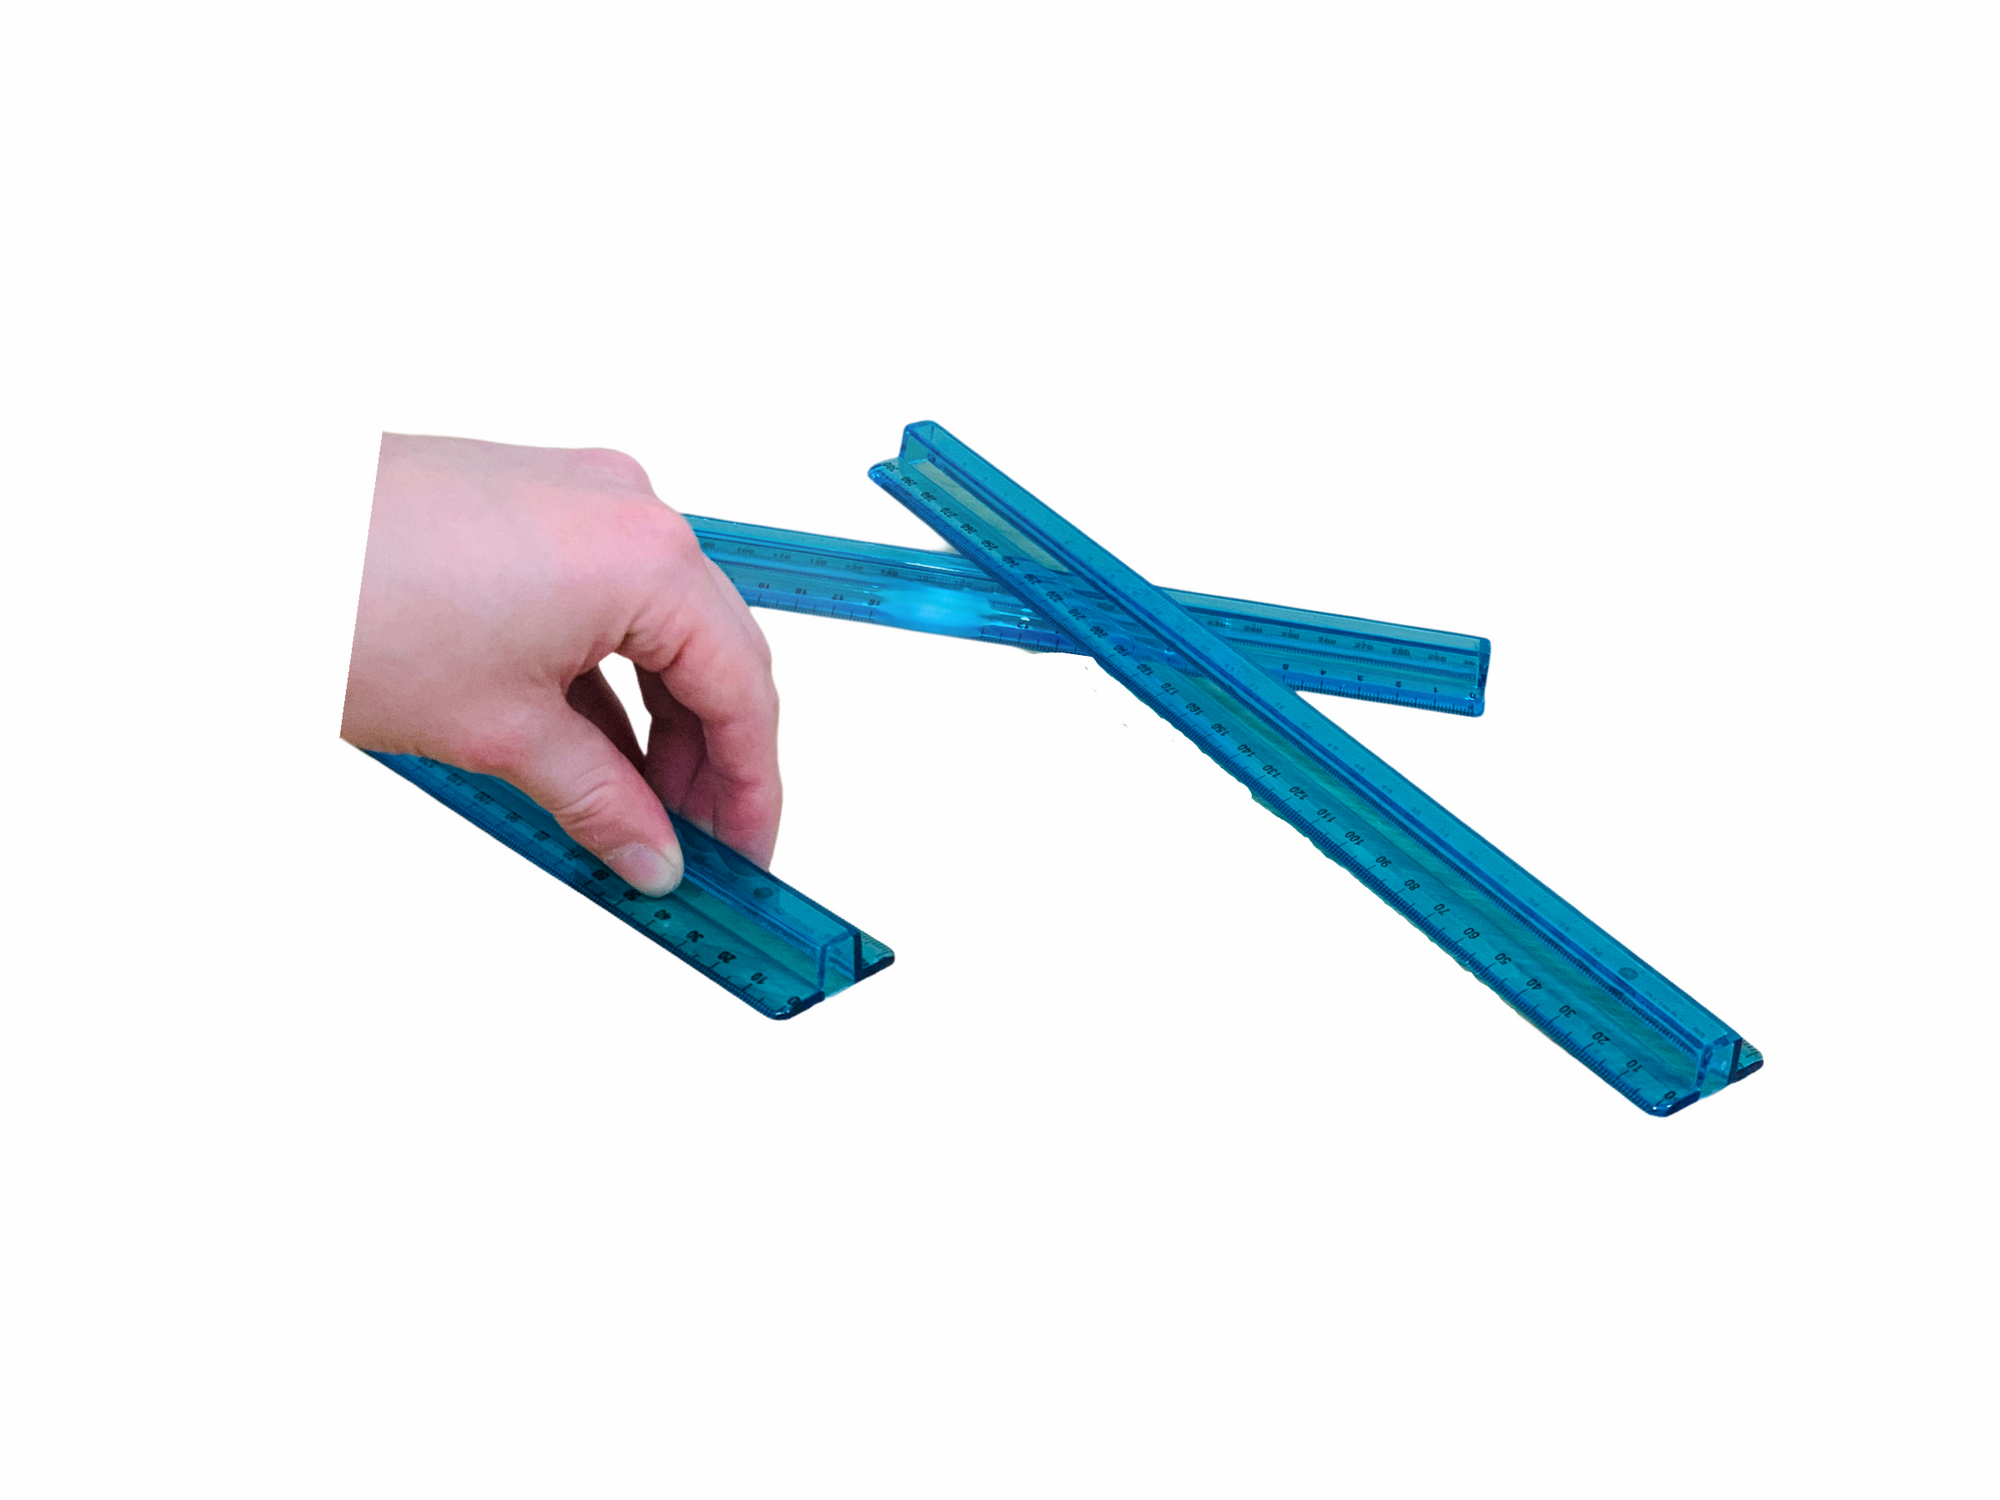 a hand holding a Micador Review Ruler next to 2 on top of each other